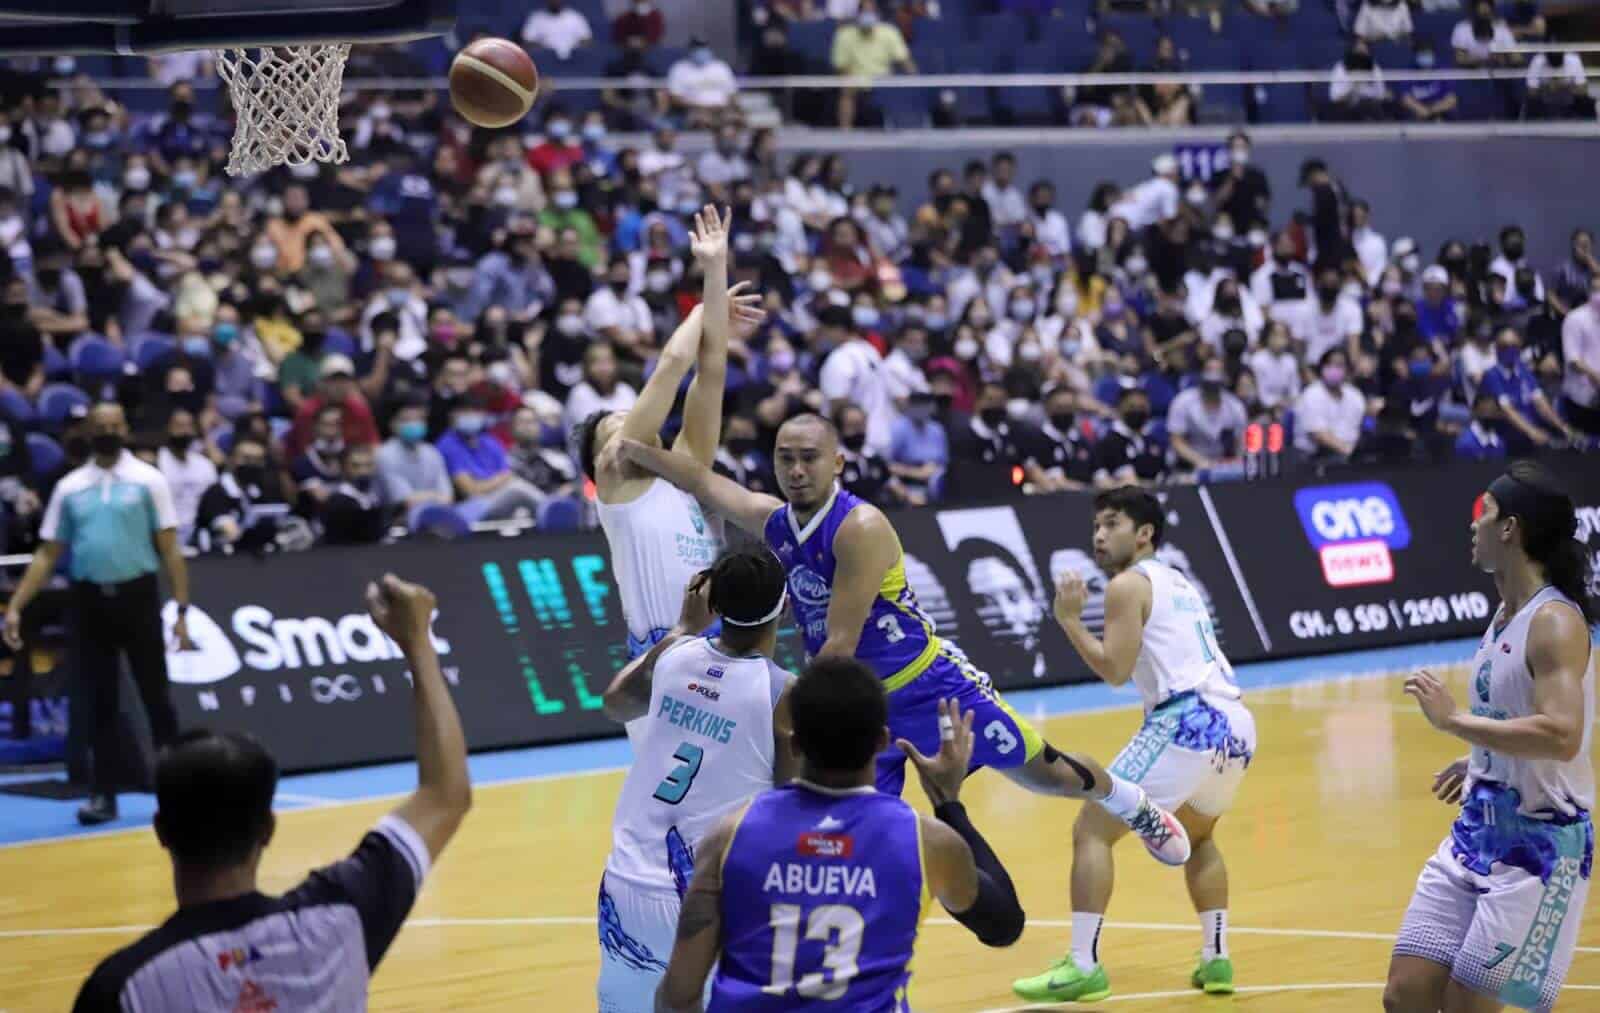 A basketball player from Magnolia crushes Phoenix to advance in PBA Governors' Cup semis.